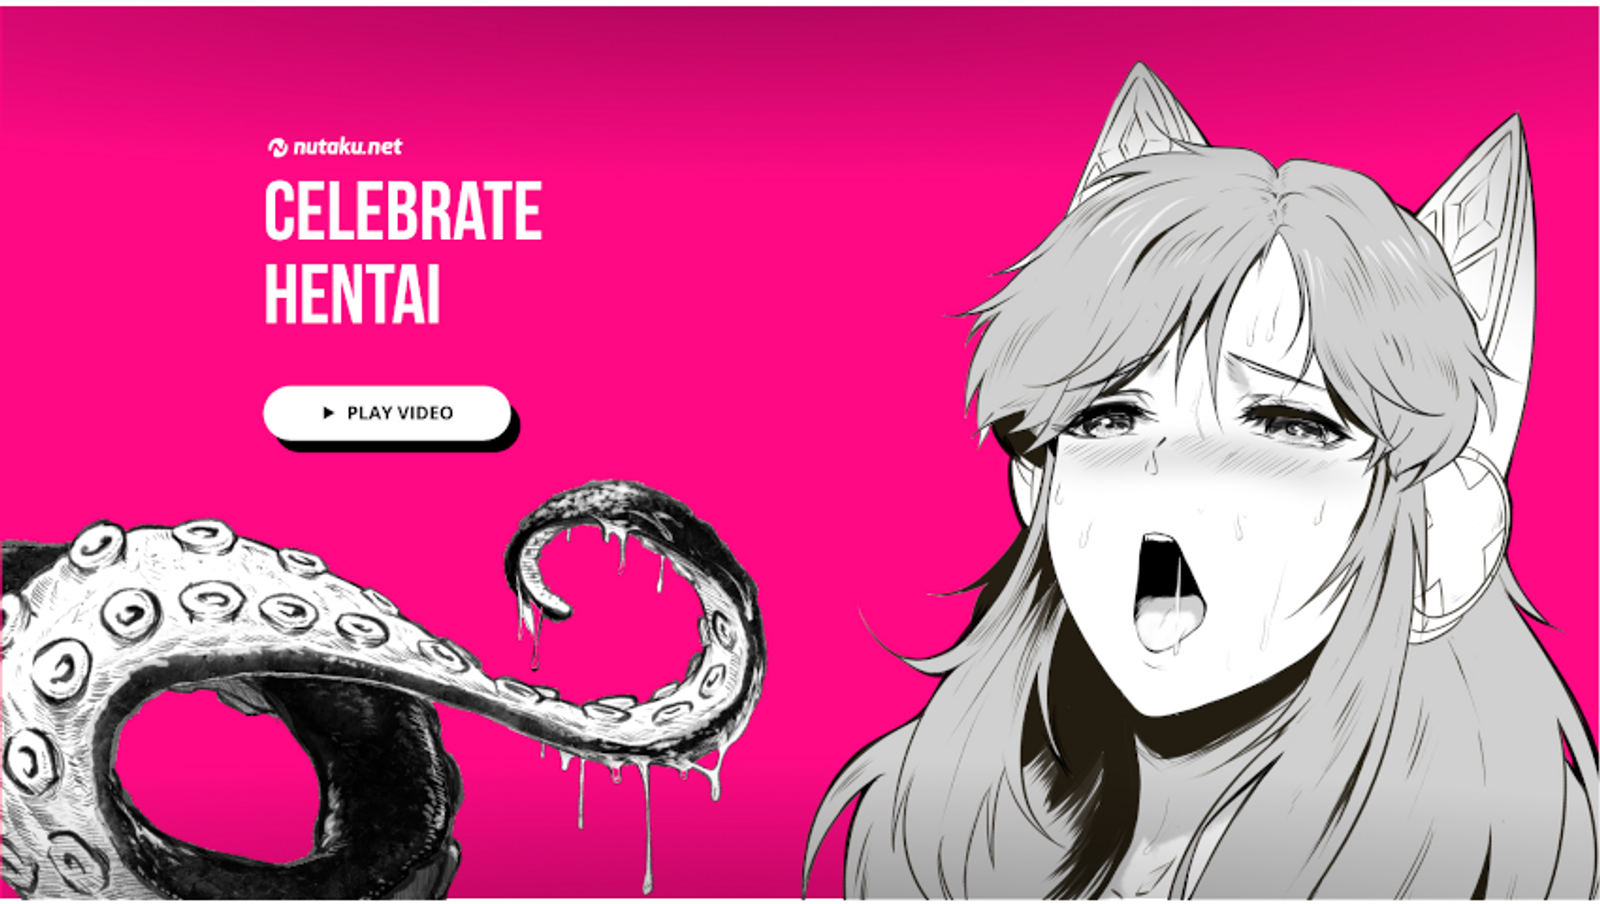 Nutaku.net Launches First Annual 'Celebrate Hentai' Online Event